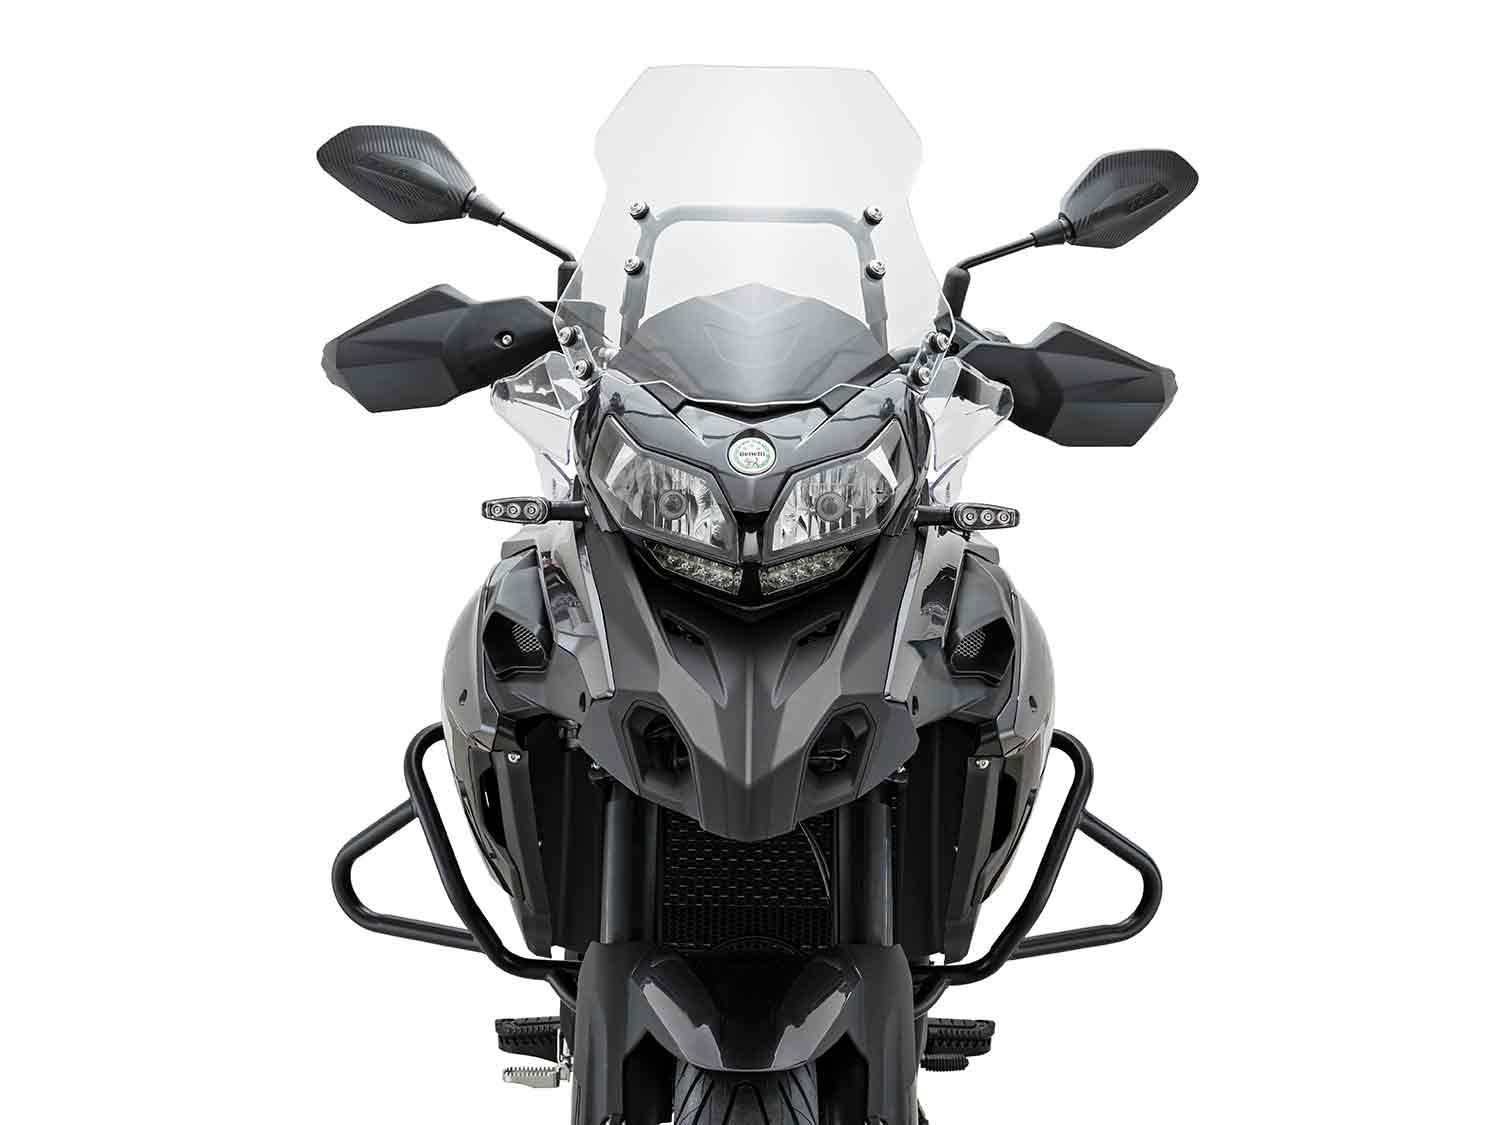 2021 Benelli TRK502 And 502X First Look